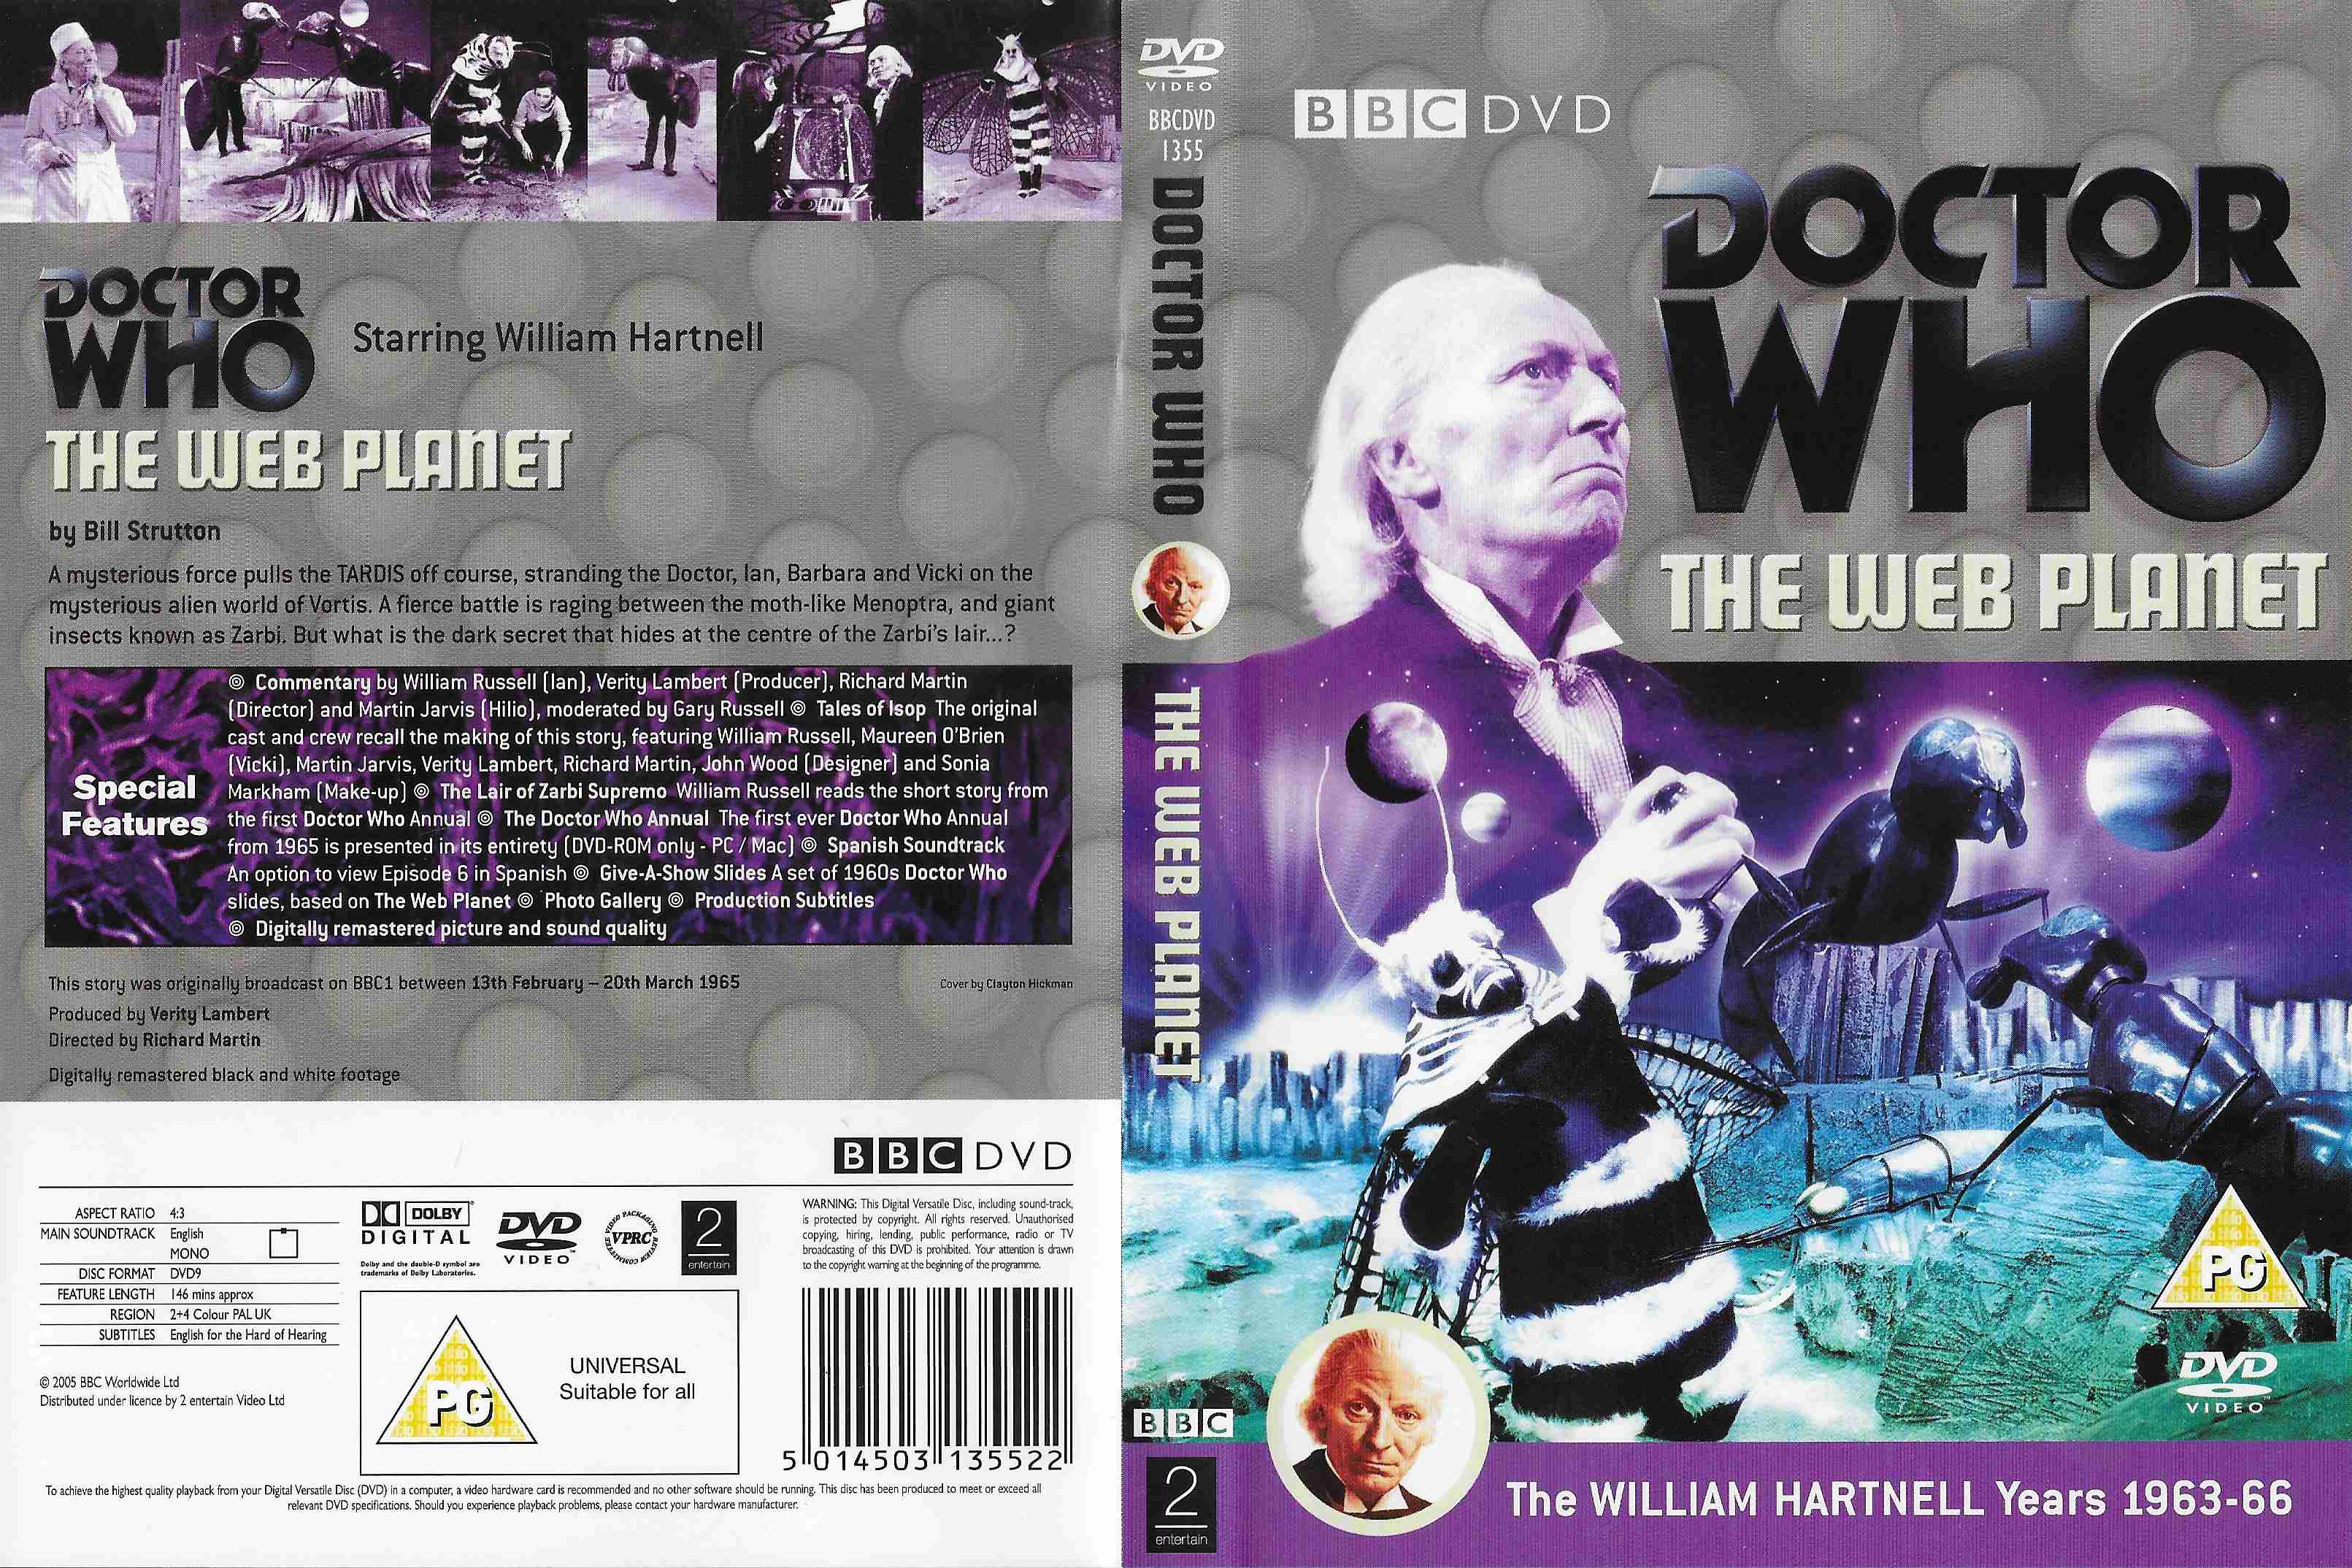 Picture of BBCDVD 1355 Doctor Who - The web planet by artist Bill Strutton from the BBC records and Tapes library